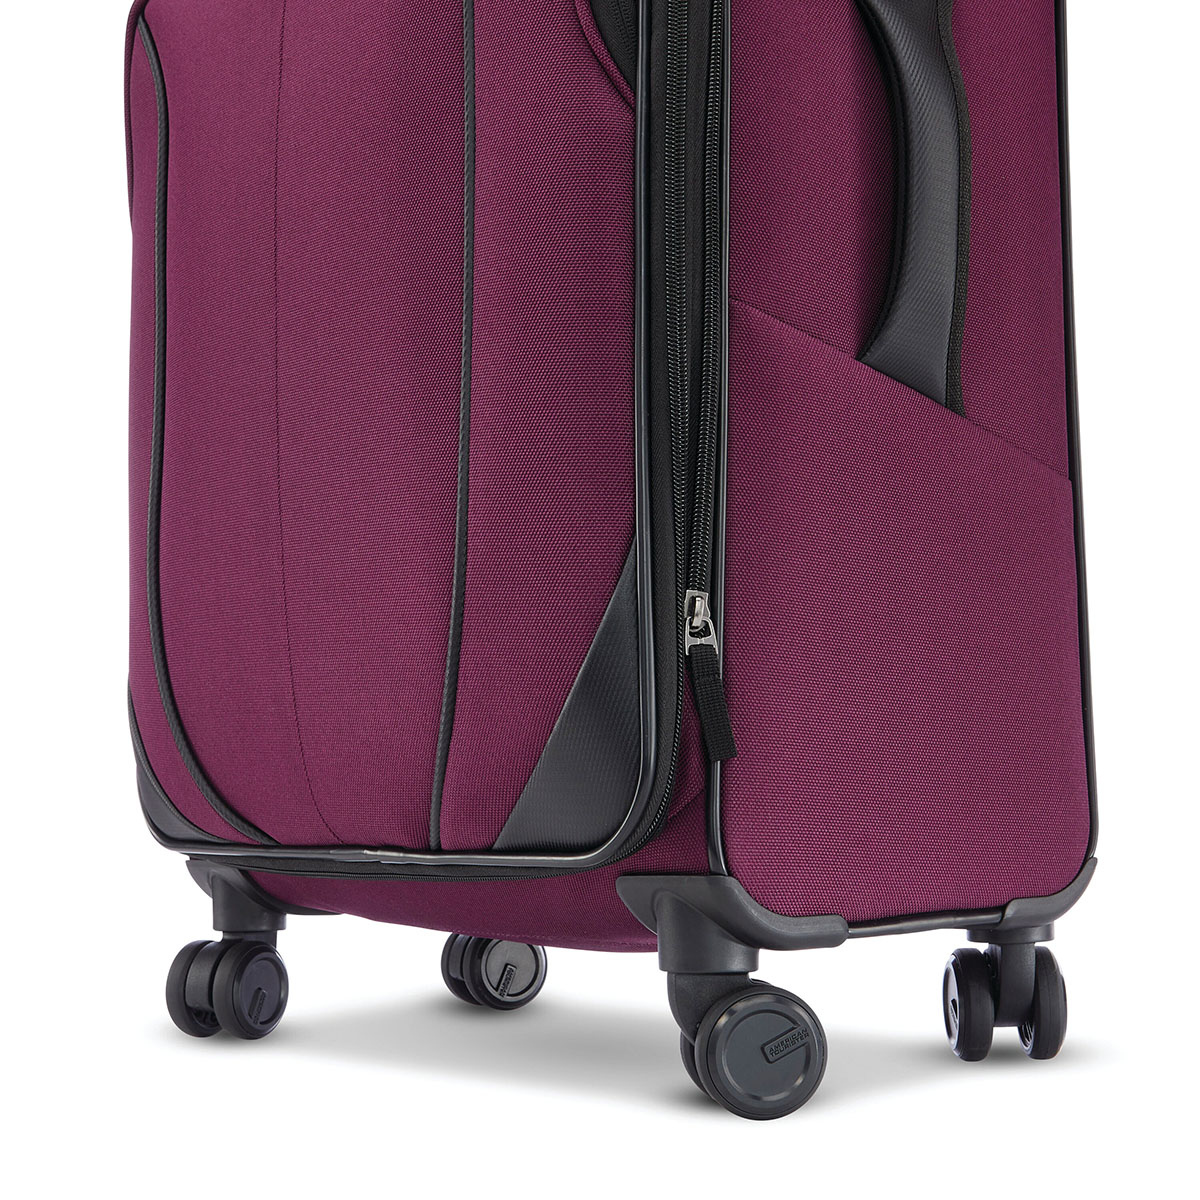 American Tourister(R) 4 Kix 28in. Upright Spinner Luggage